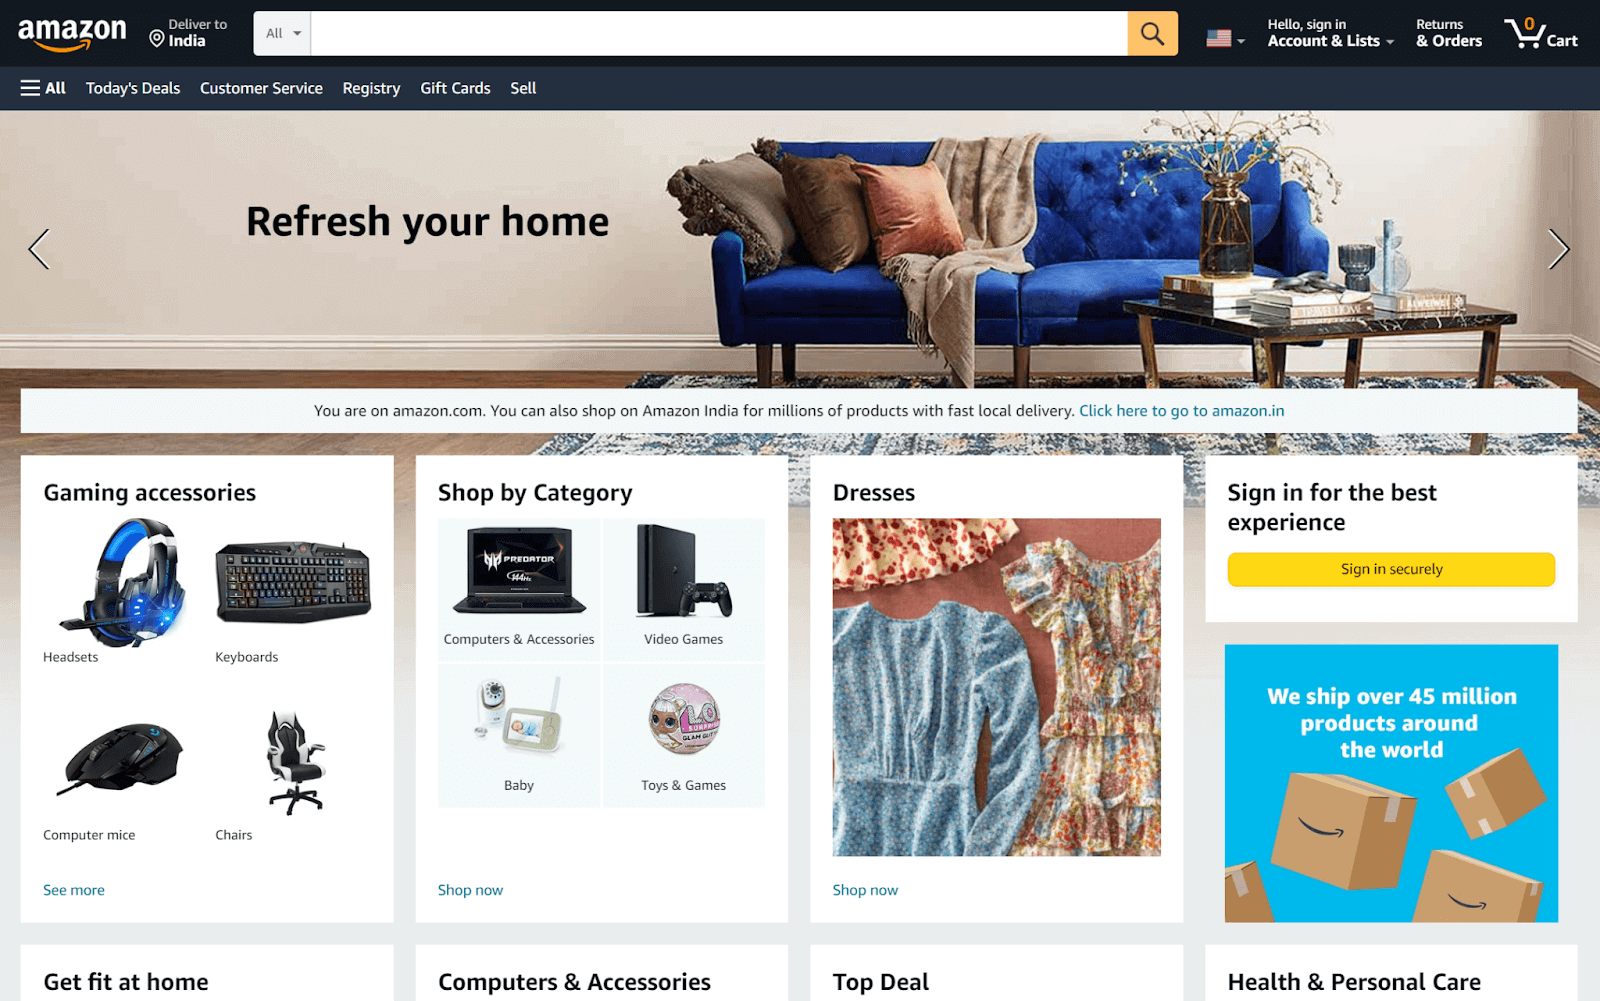 Amazon uses CSS Flexbox in its layout 